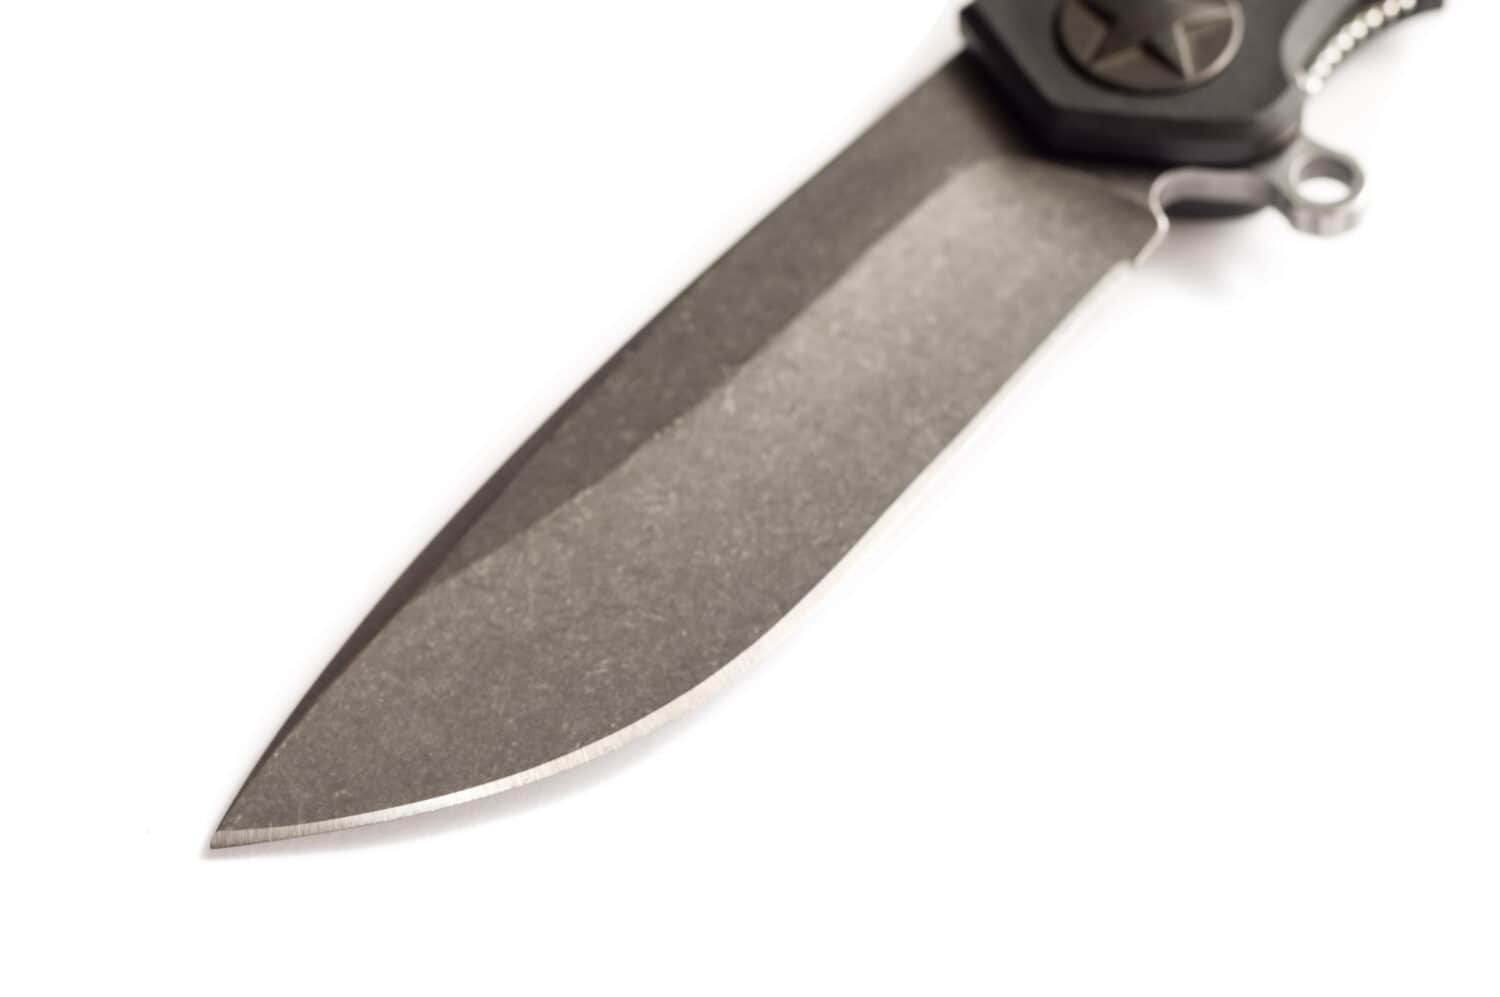 Knife with an unusual blade. The blade of the knife at an angle on the diagonal.